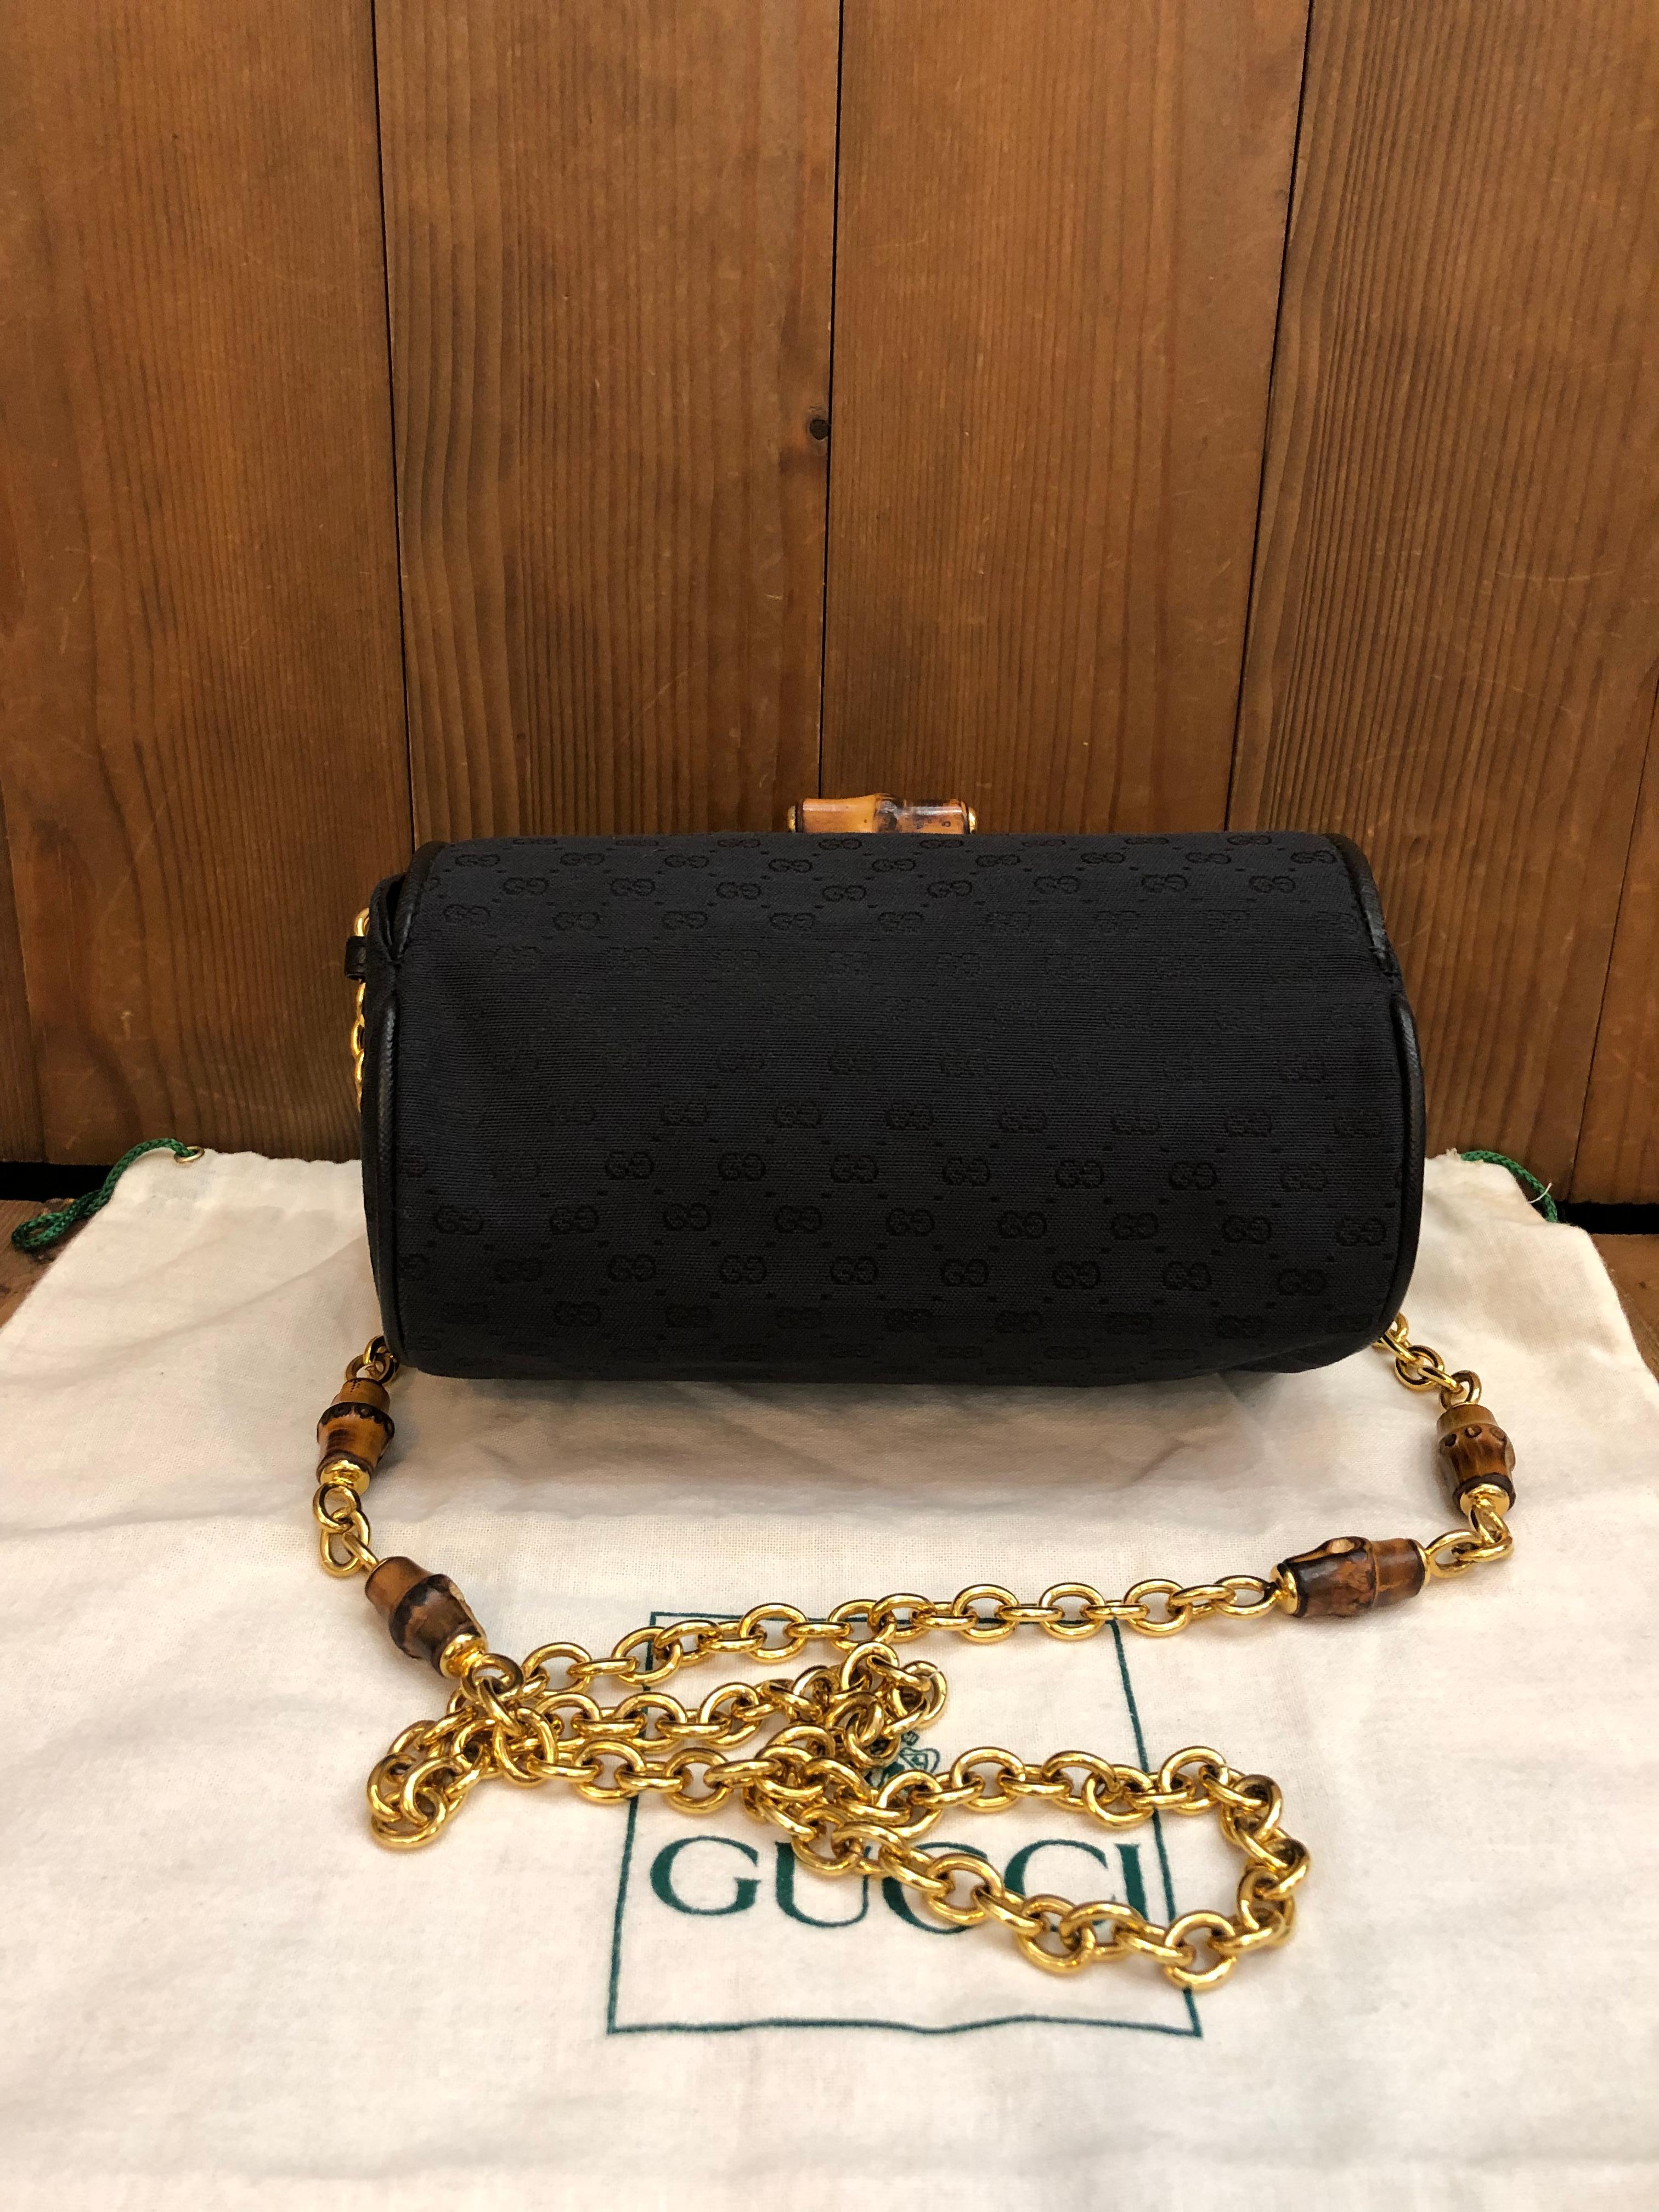 This vintage GUCCI bamboo cylinder chain pouch is crafted of micro GG jacquard in back featuring gold toned chain with bamboo internodes. Front flap bamboo magnetic snap closure opens to coated interior that has been professionally cleaned. Made in